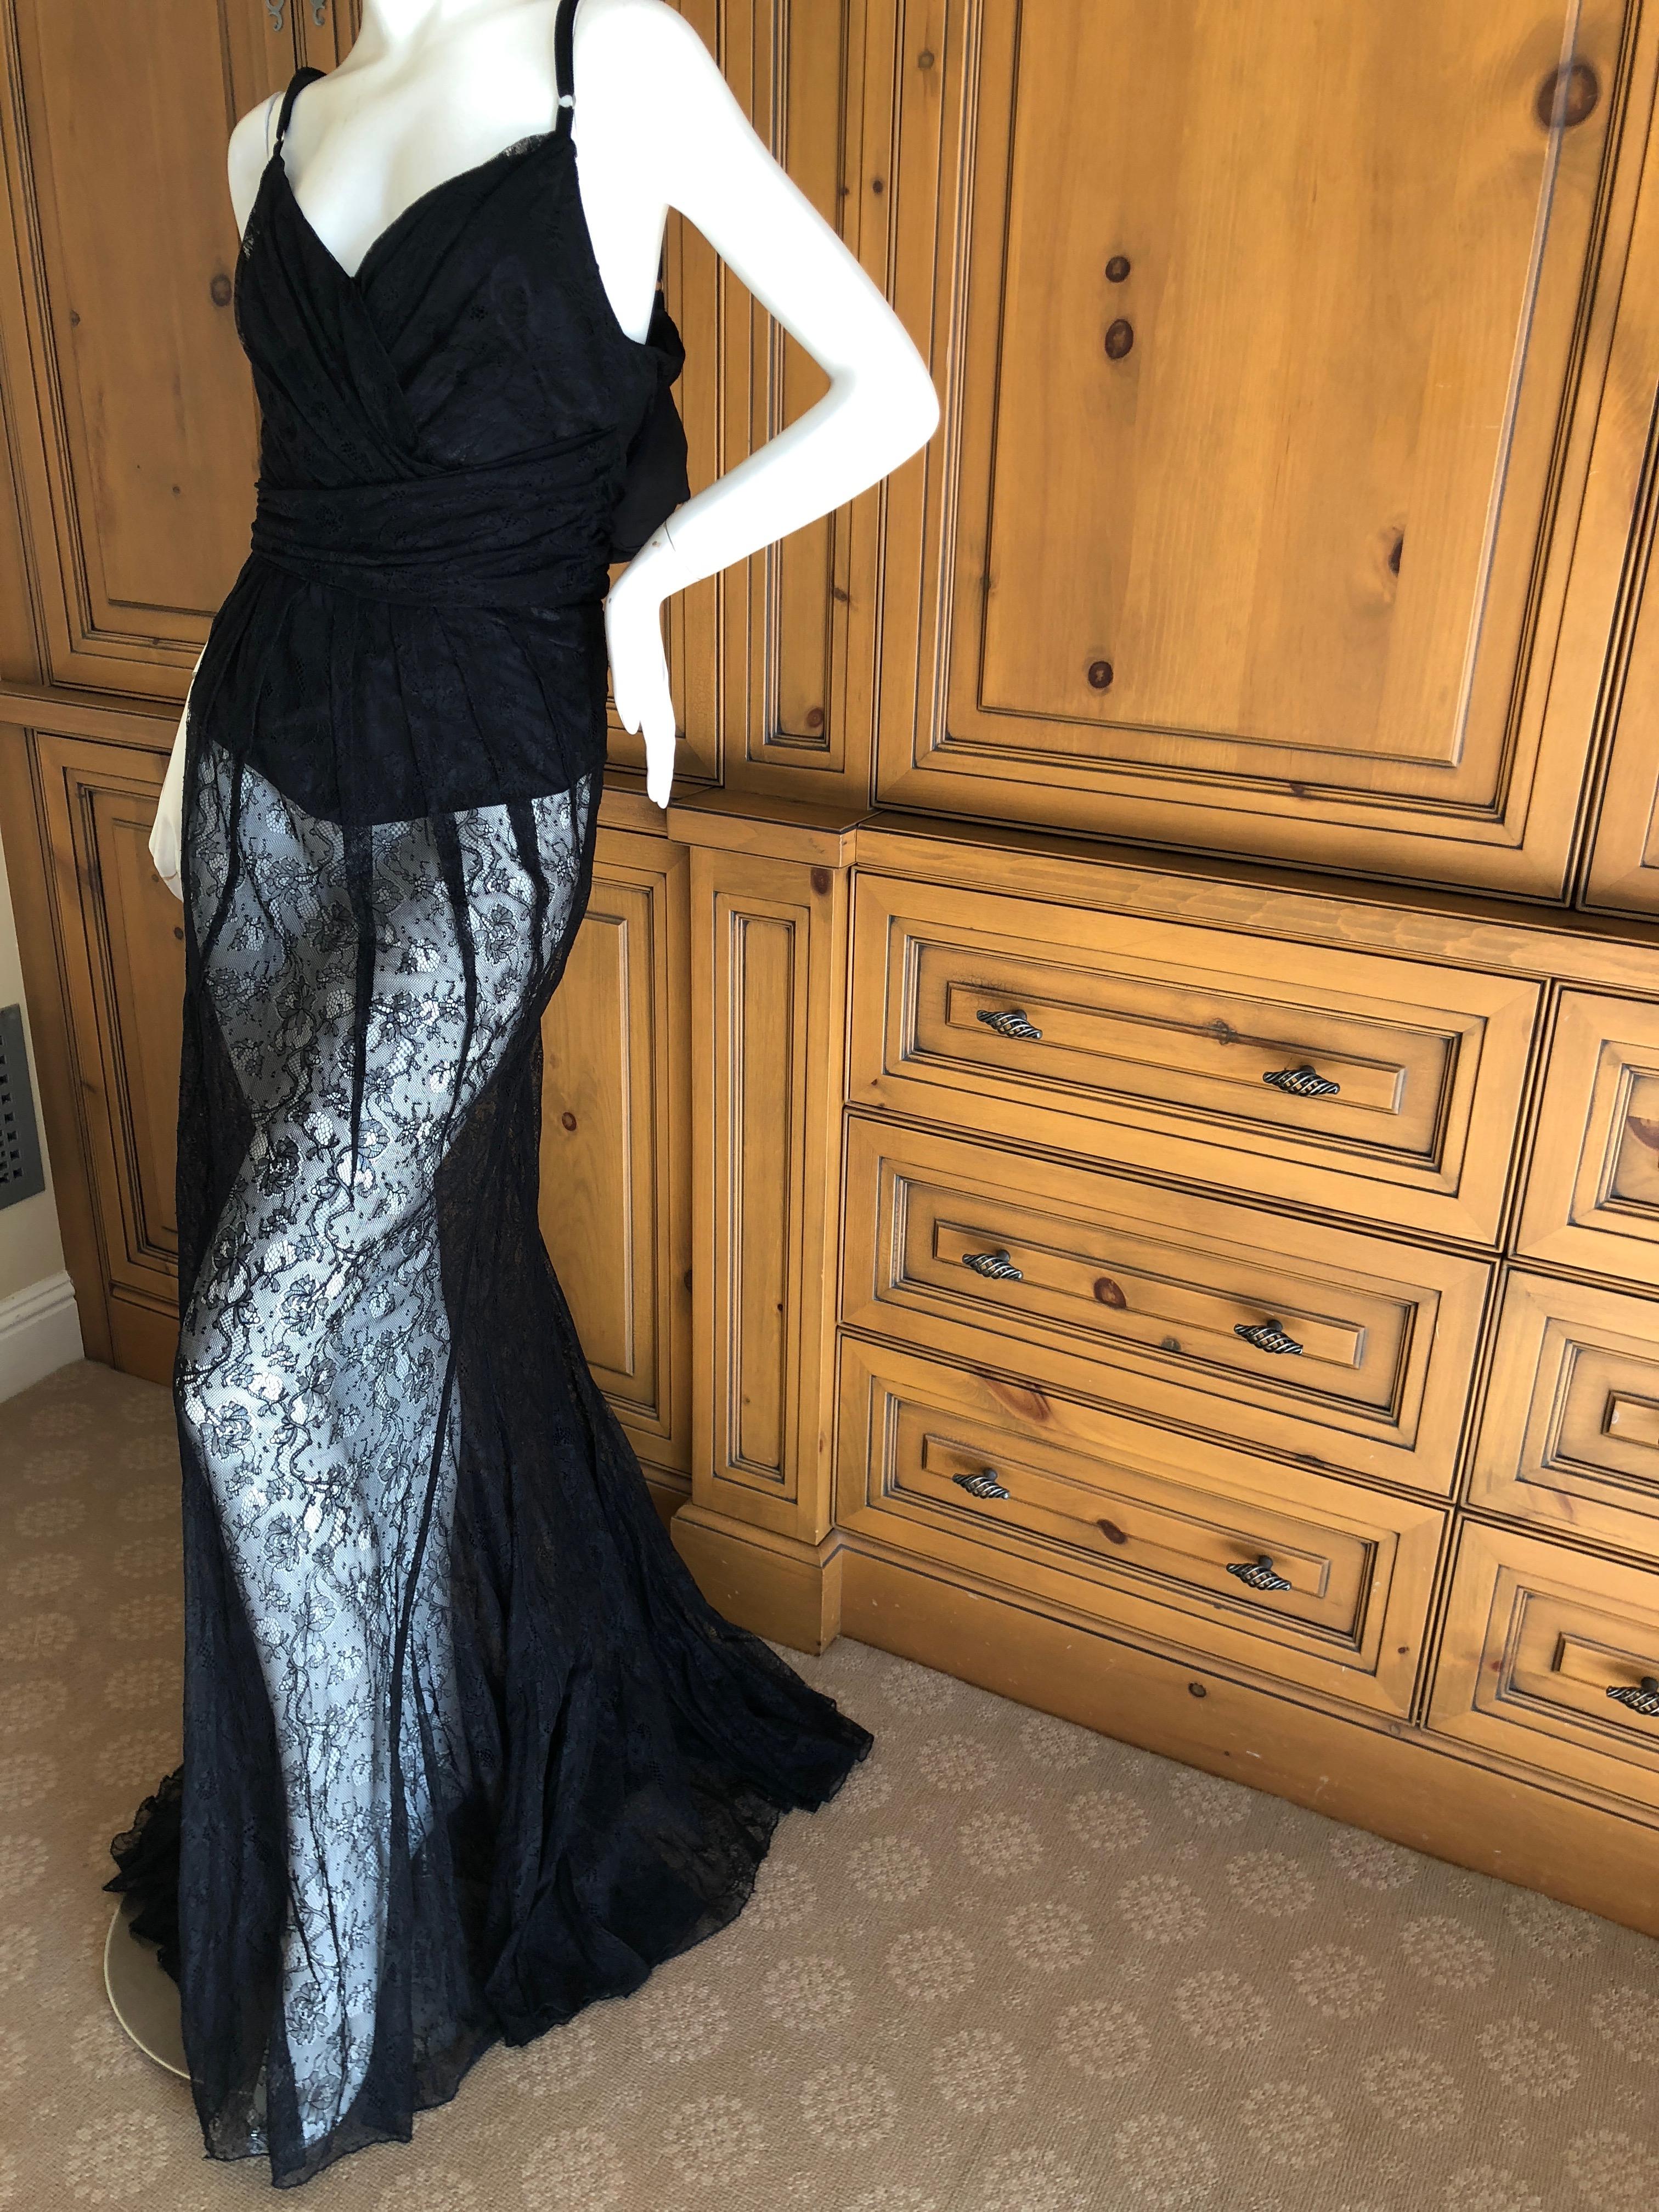 D&G Dolce & Gabbana Sheer Black Lace Vintage Evening Dress with Train For Sale 1